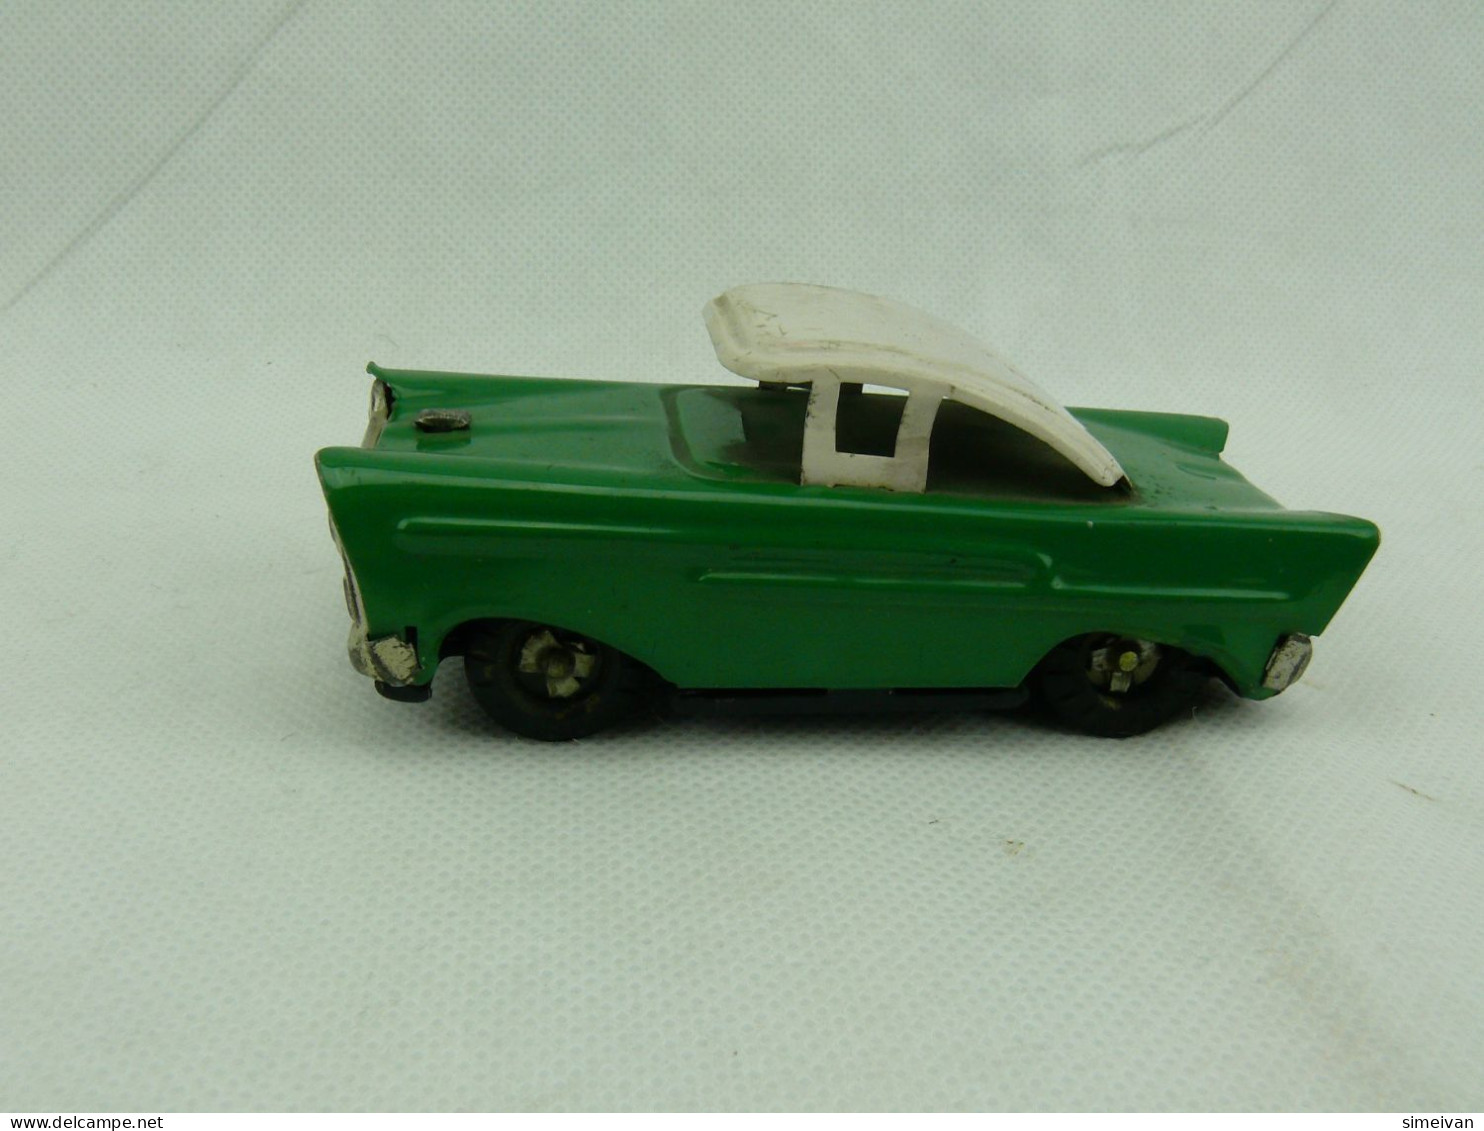 VINTAGE RARE TIN TOY FRICTION CAR 1960's MADE IN CHINA #2388 - Oud Speelgoed